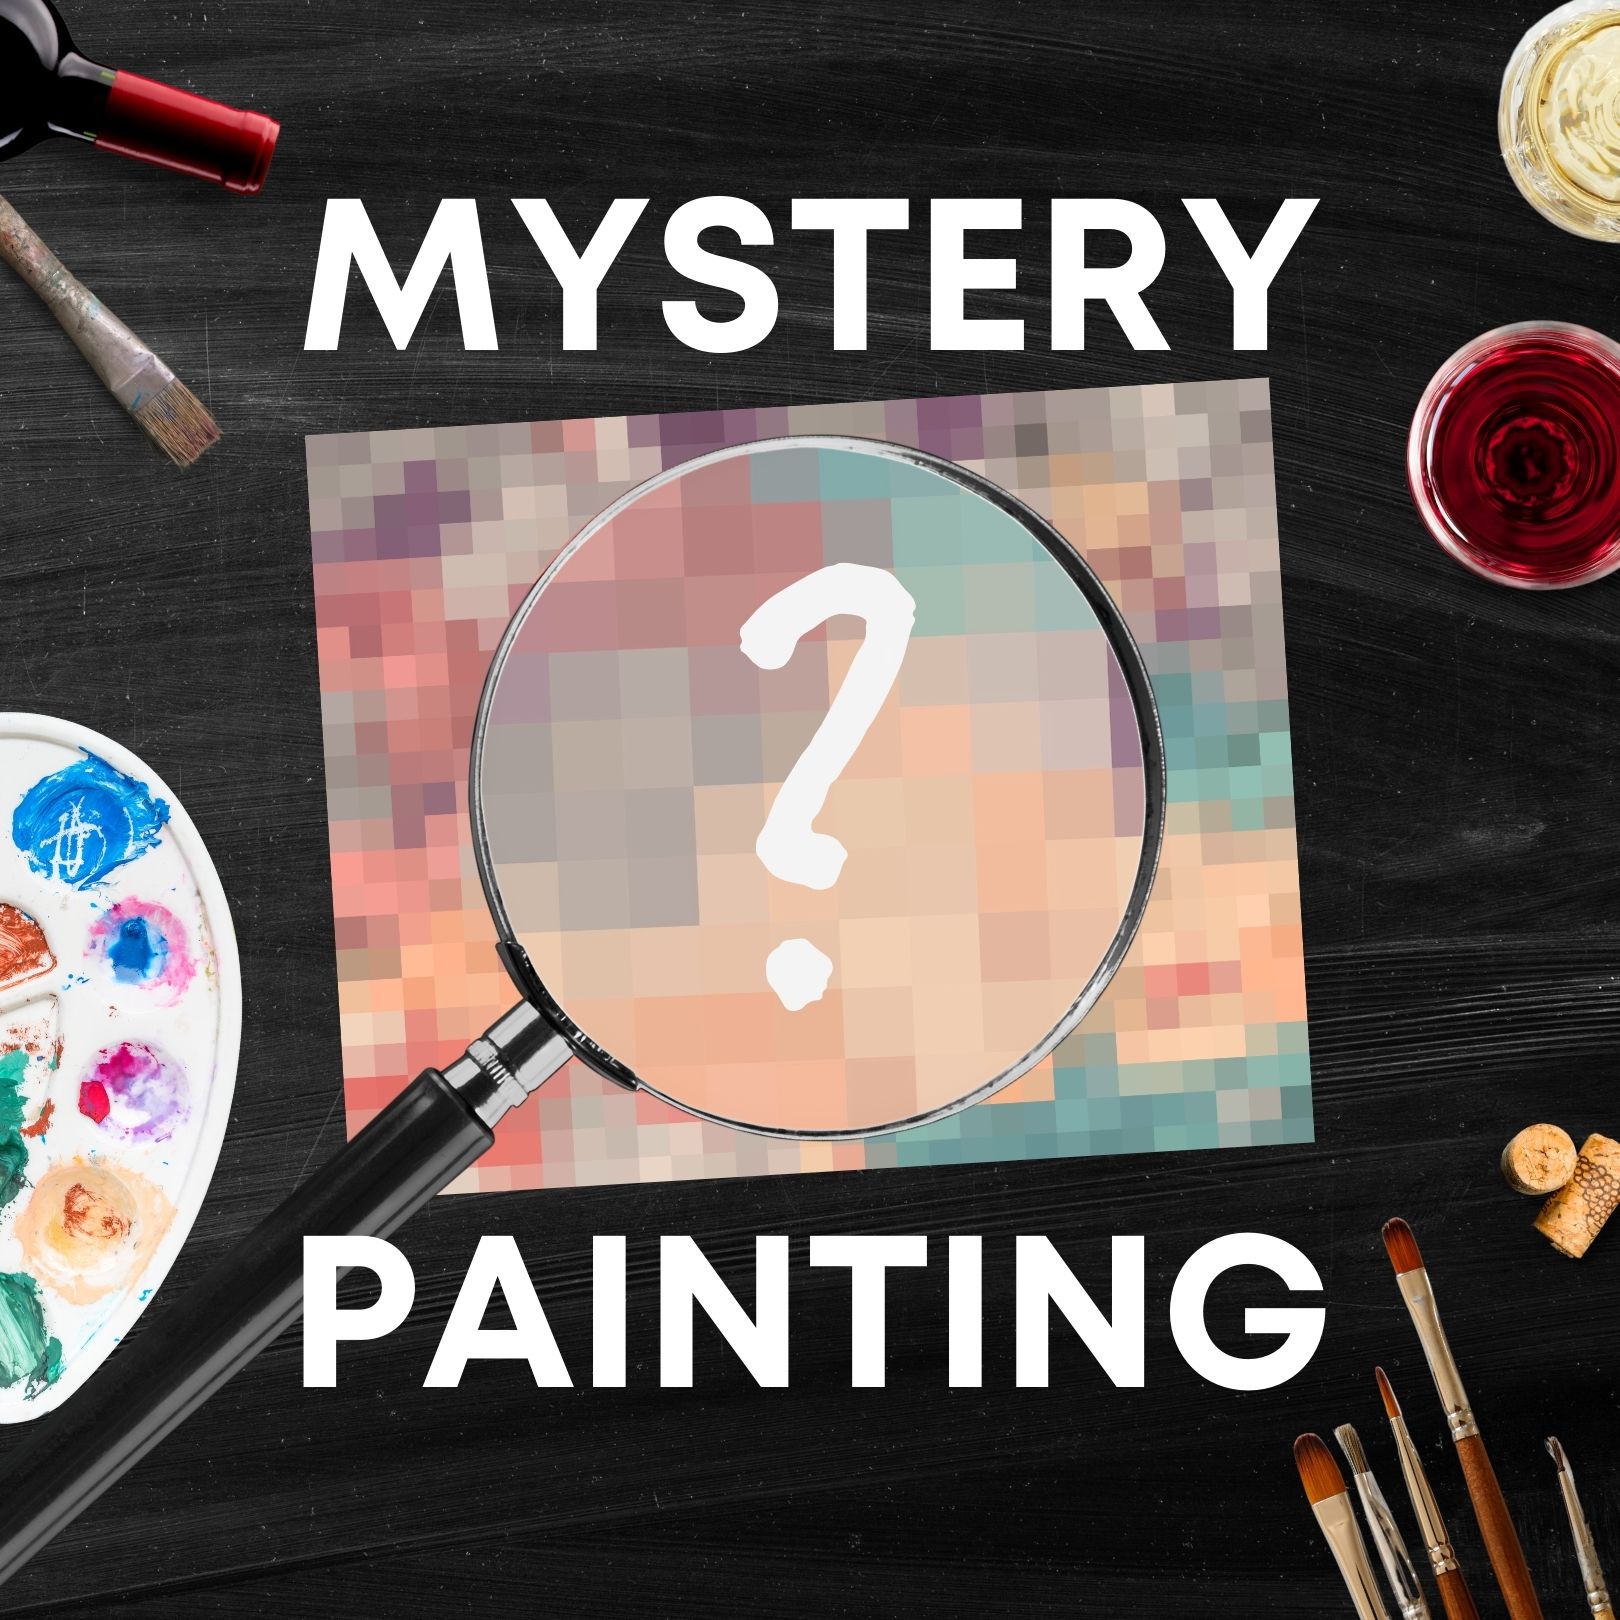 April 1st Mystery Painting Event